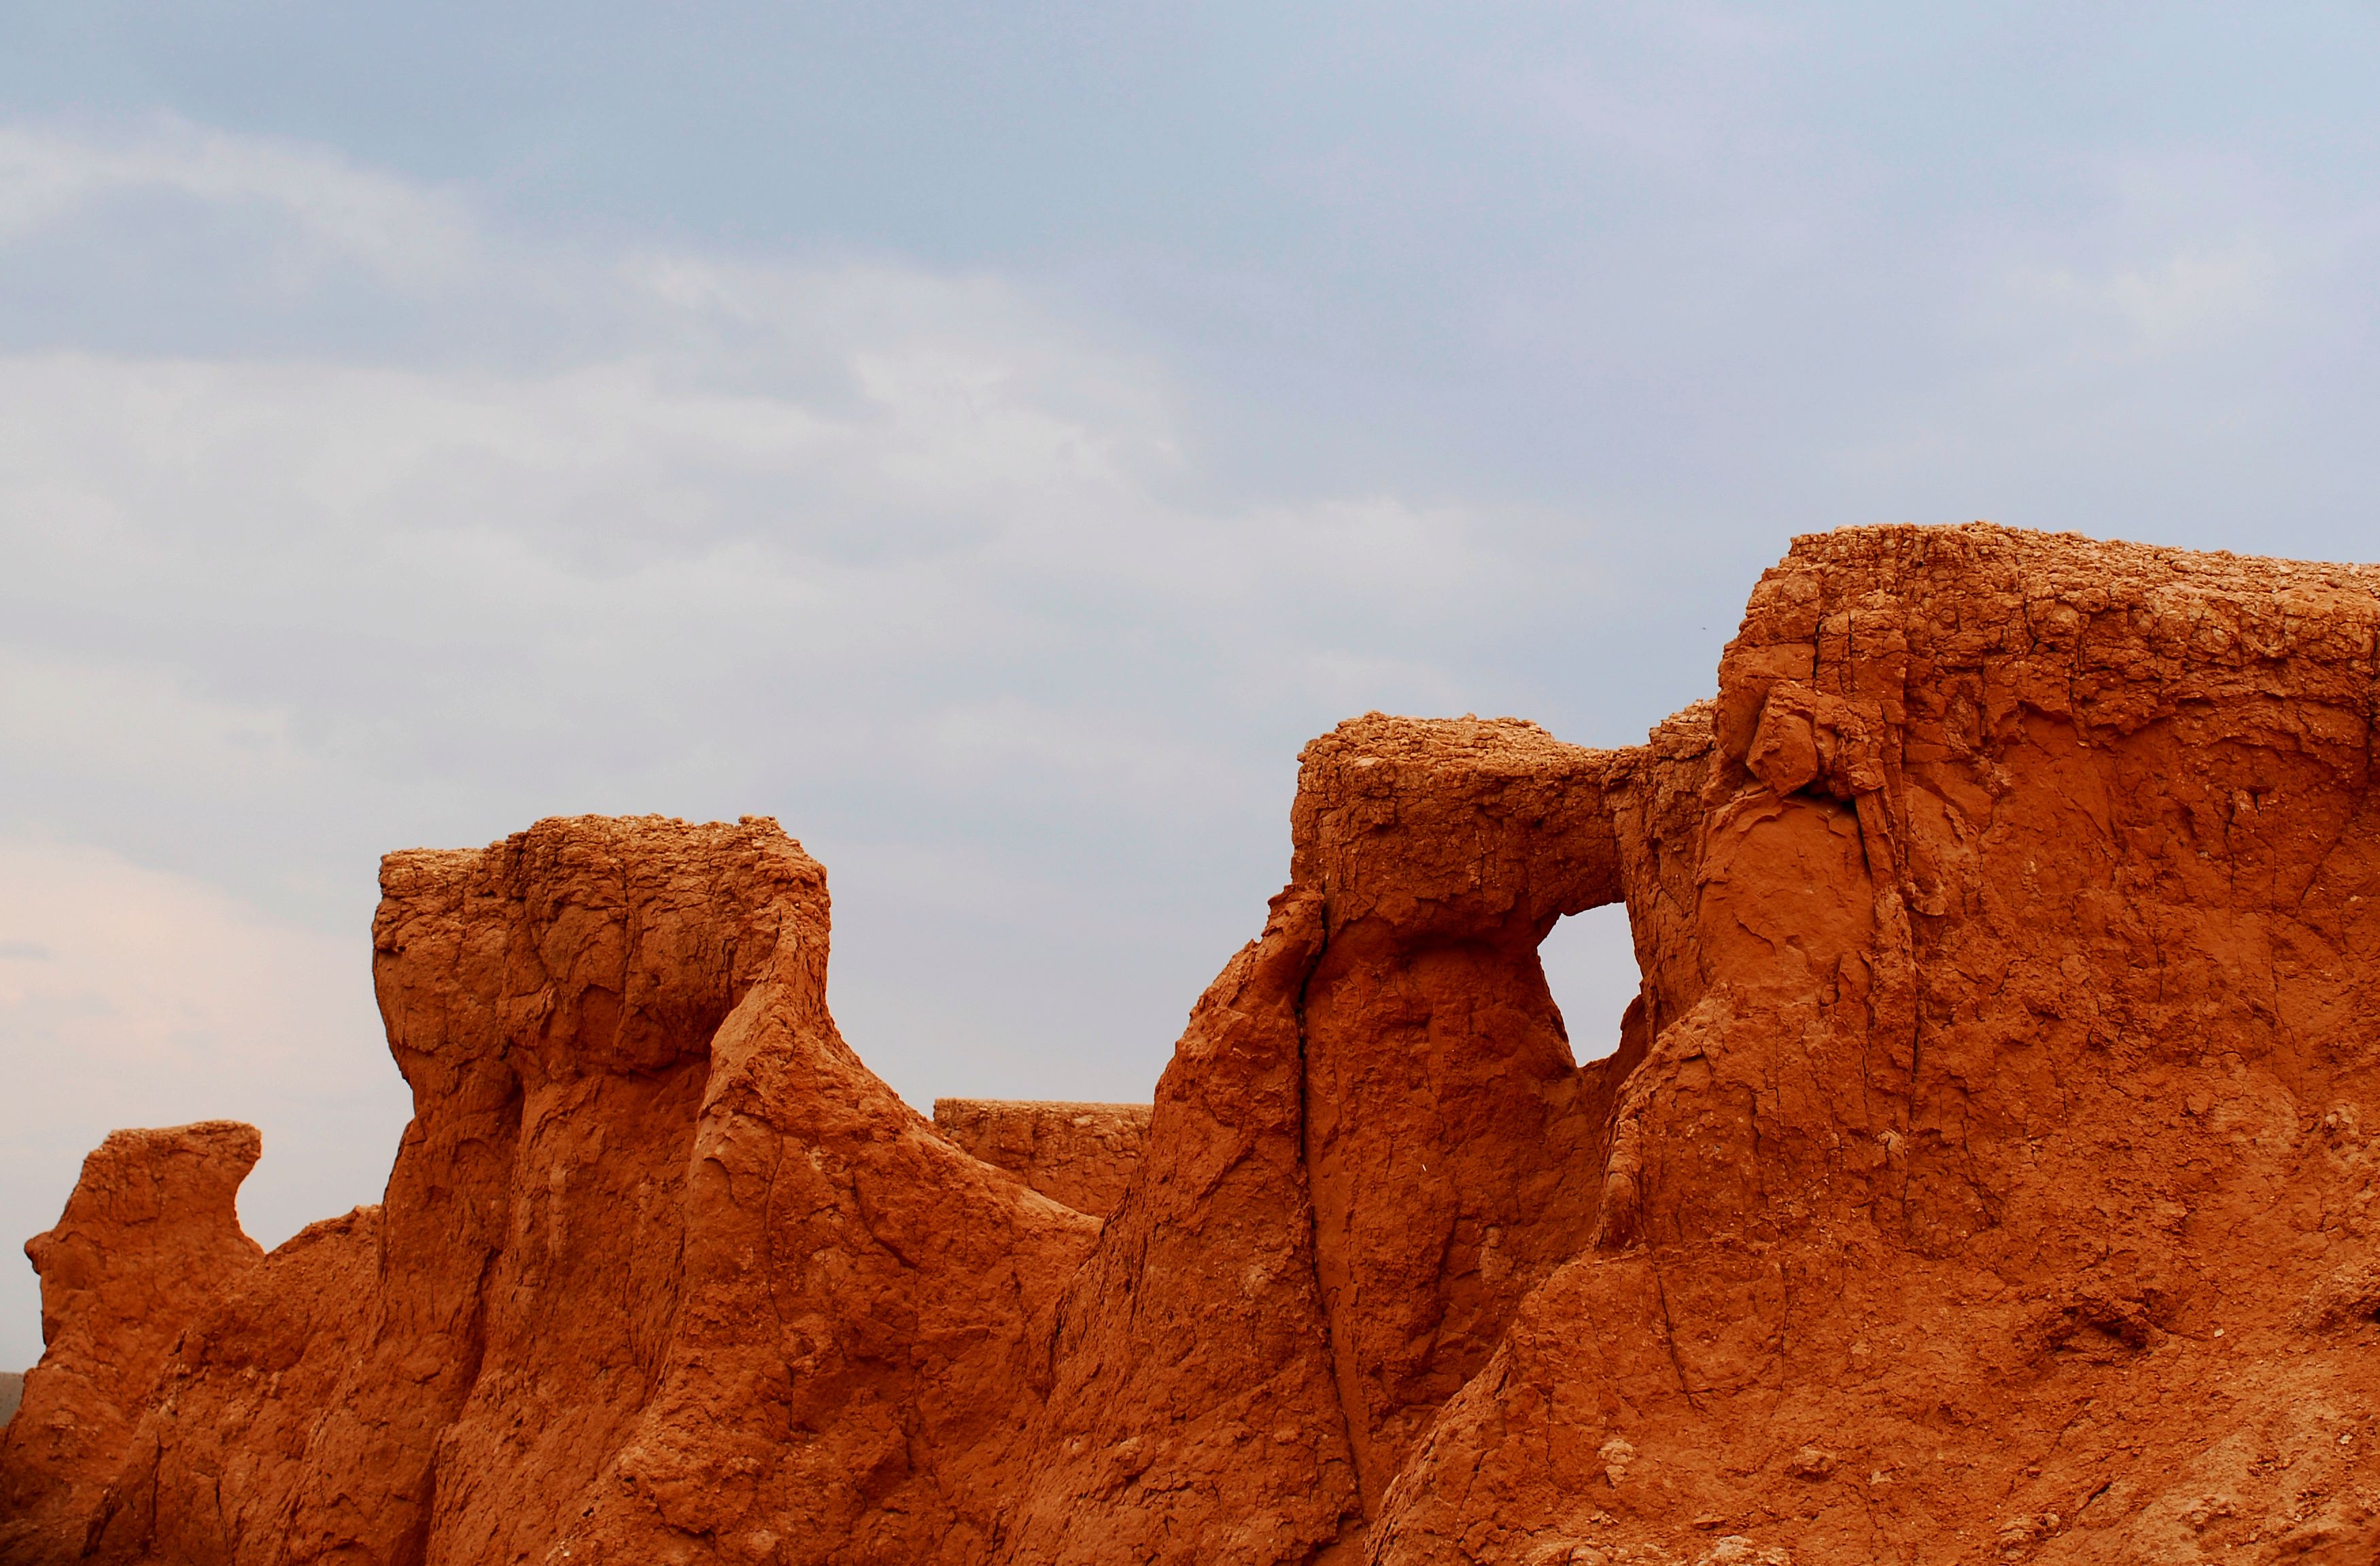 A sandstone at the Flaming Cliffs, the northern Gobi Desert, in Mongolia